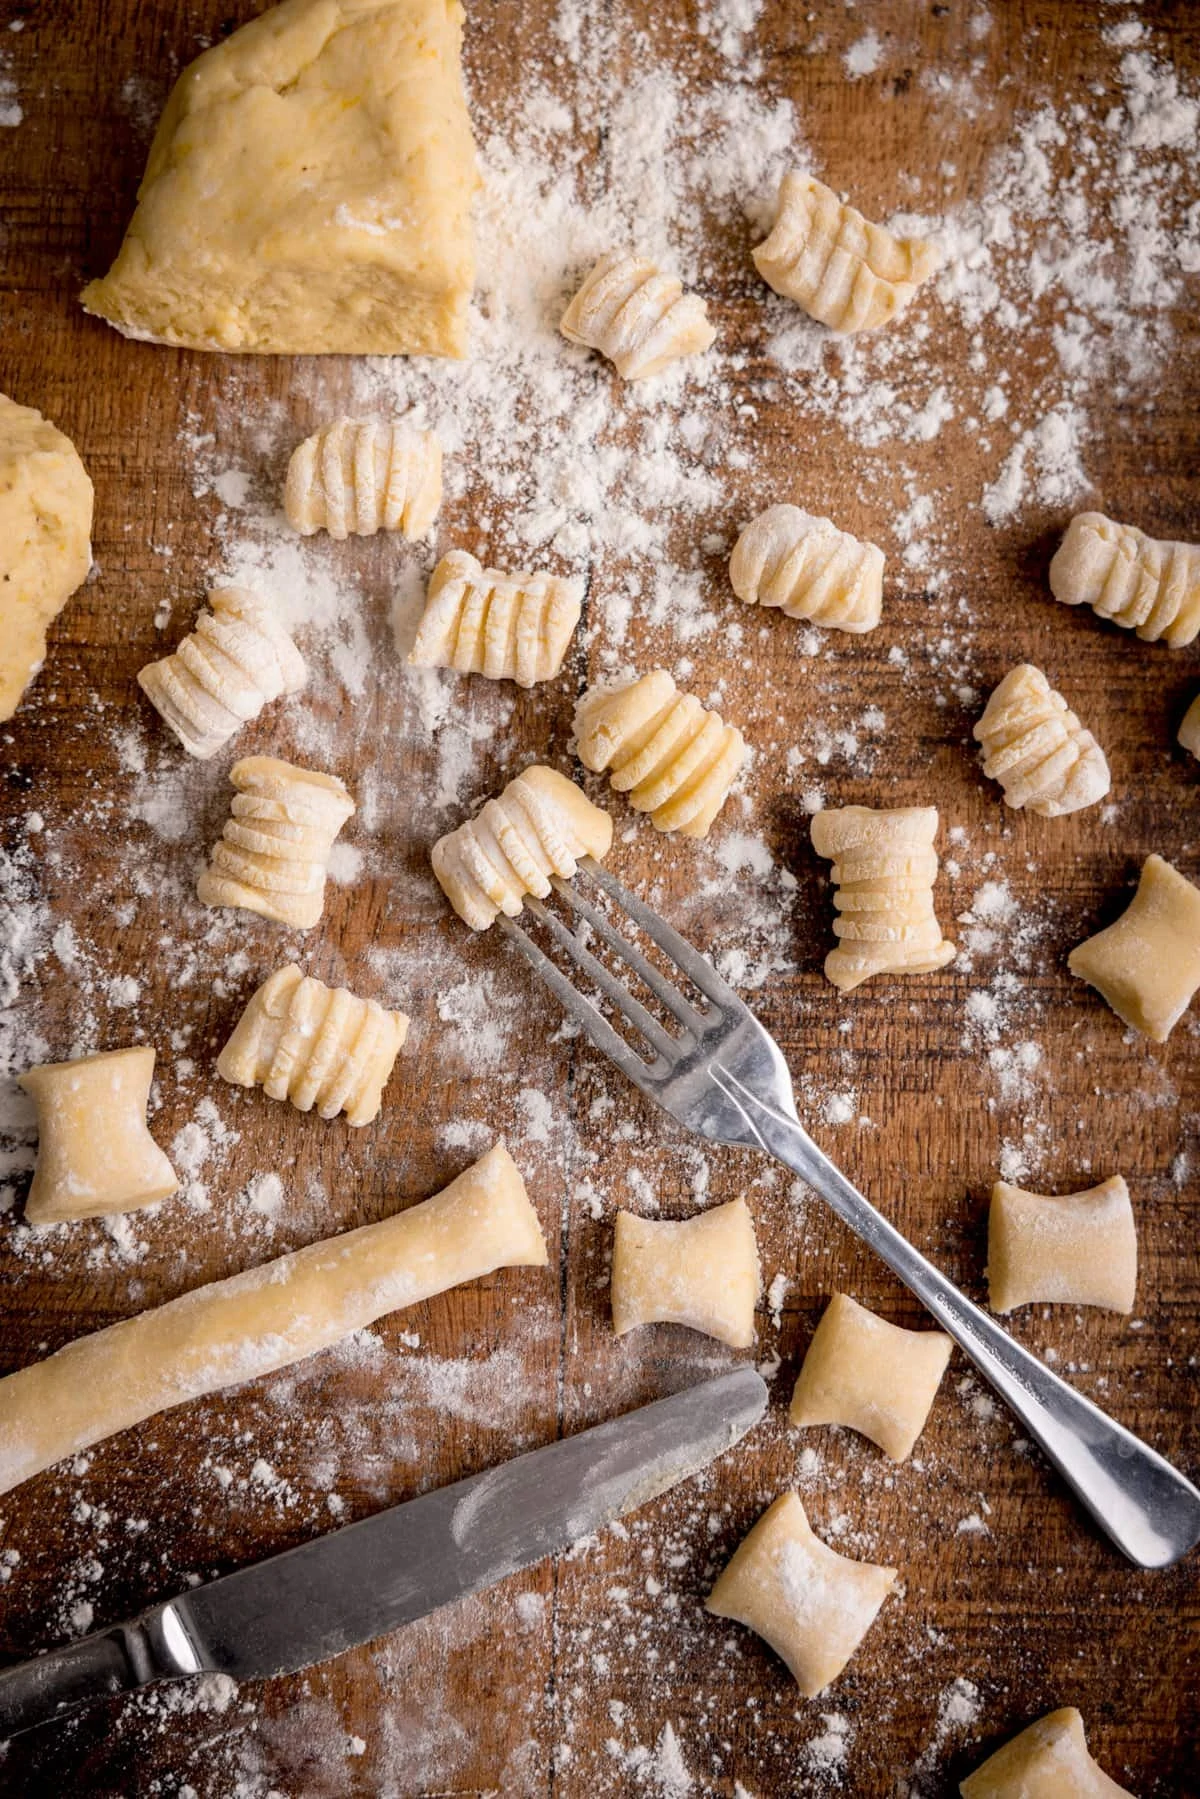 Tall image of Gnocchi being cut and shaped on a wooden board. There is a fork in shot - used for rolling into a ridged shape.